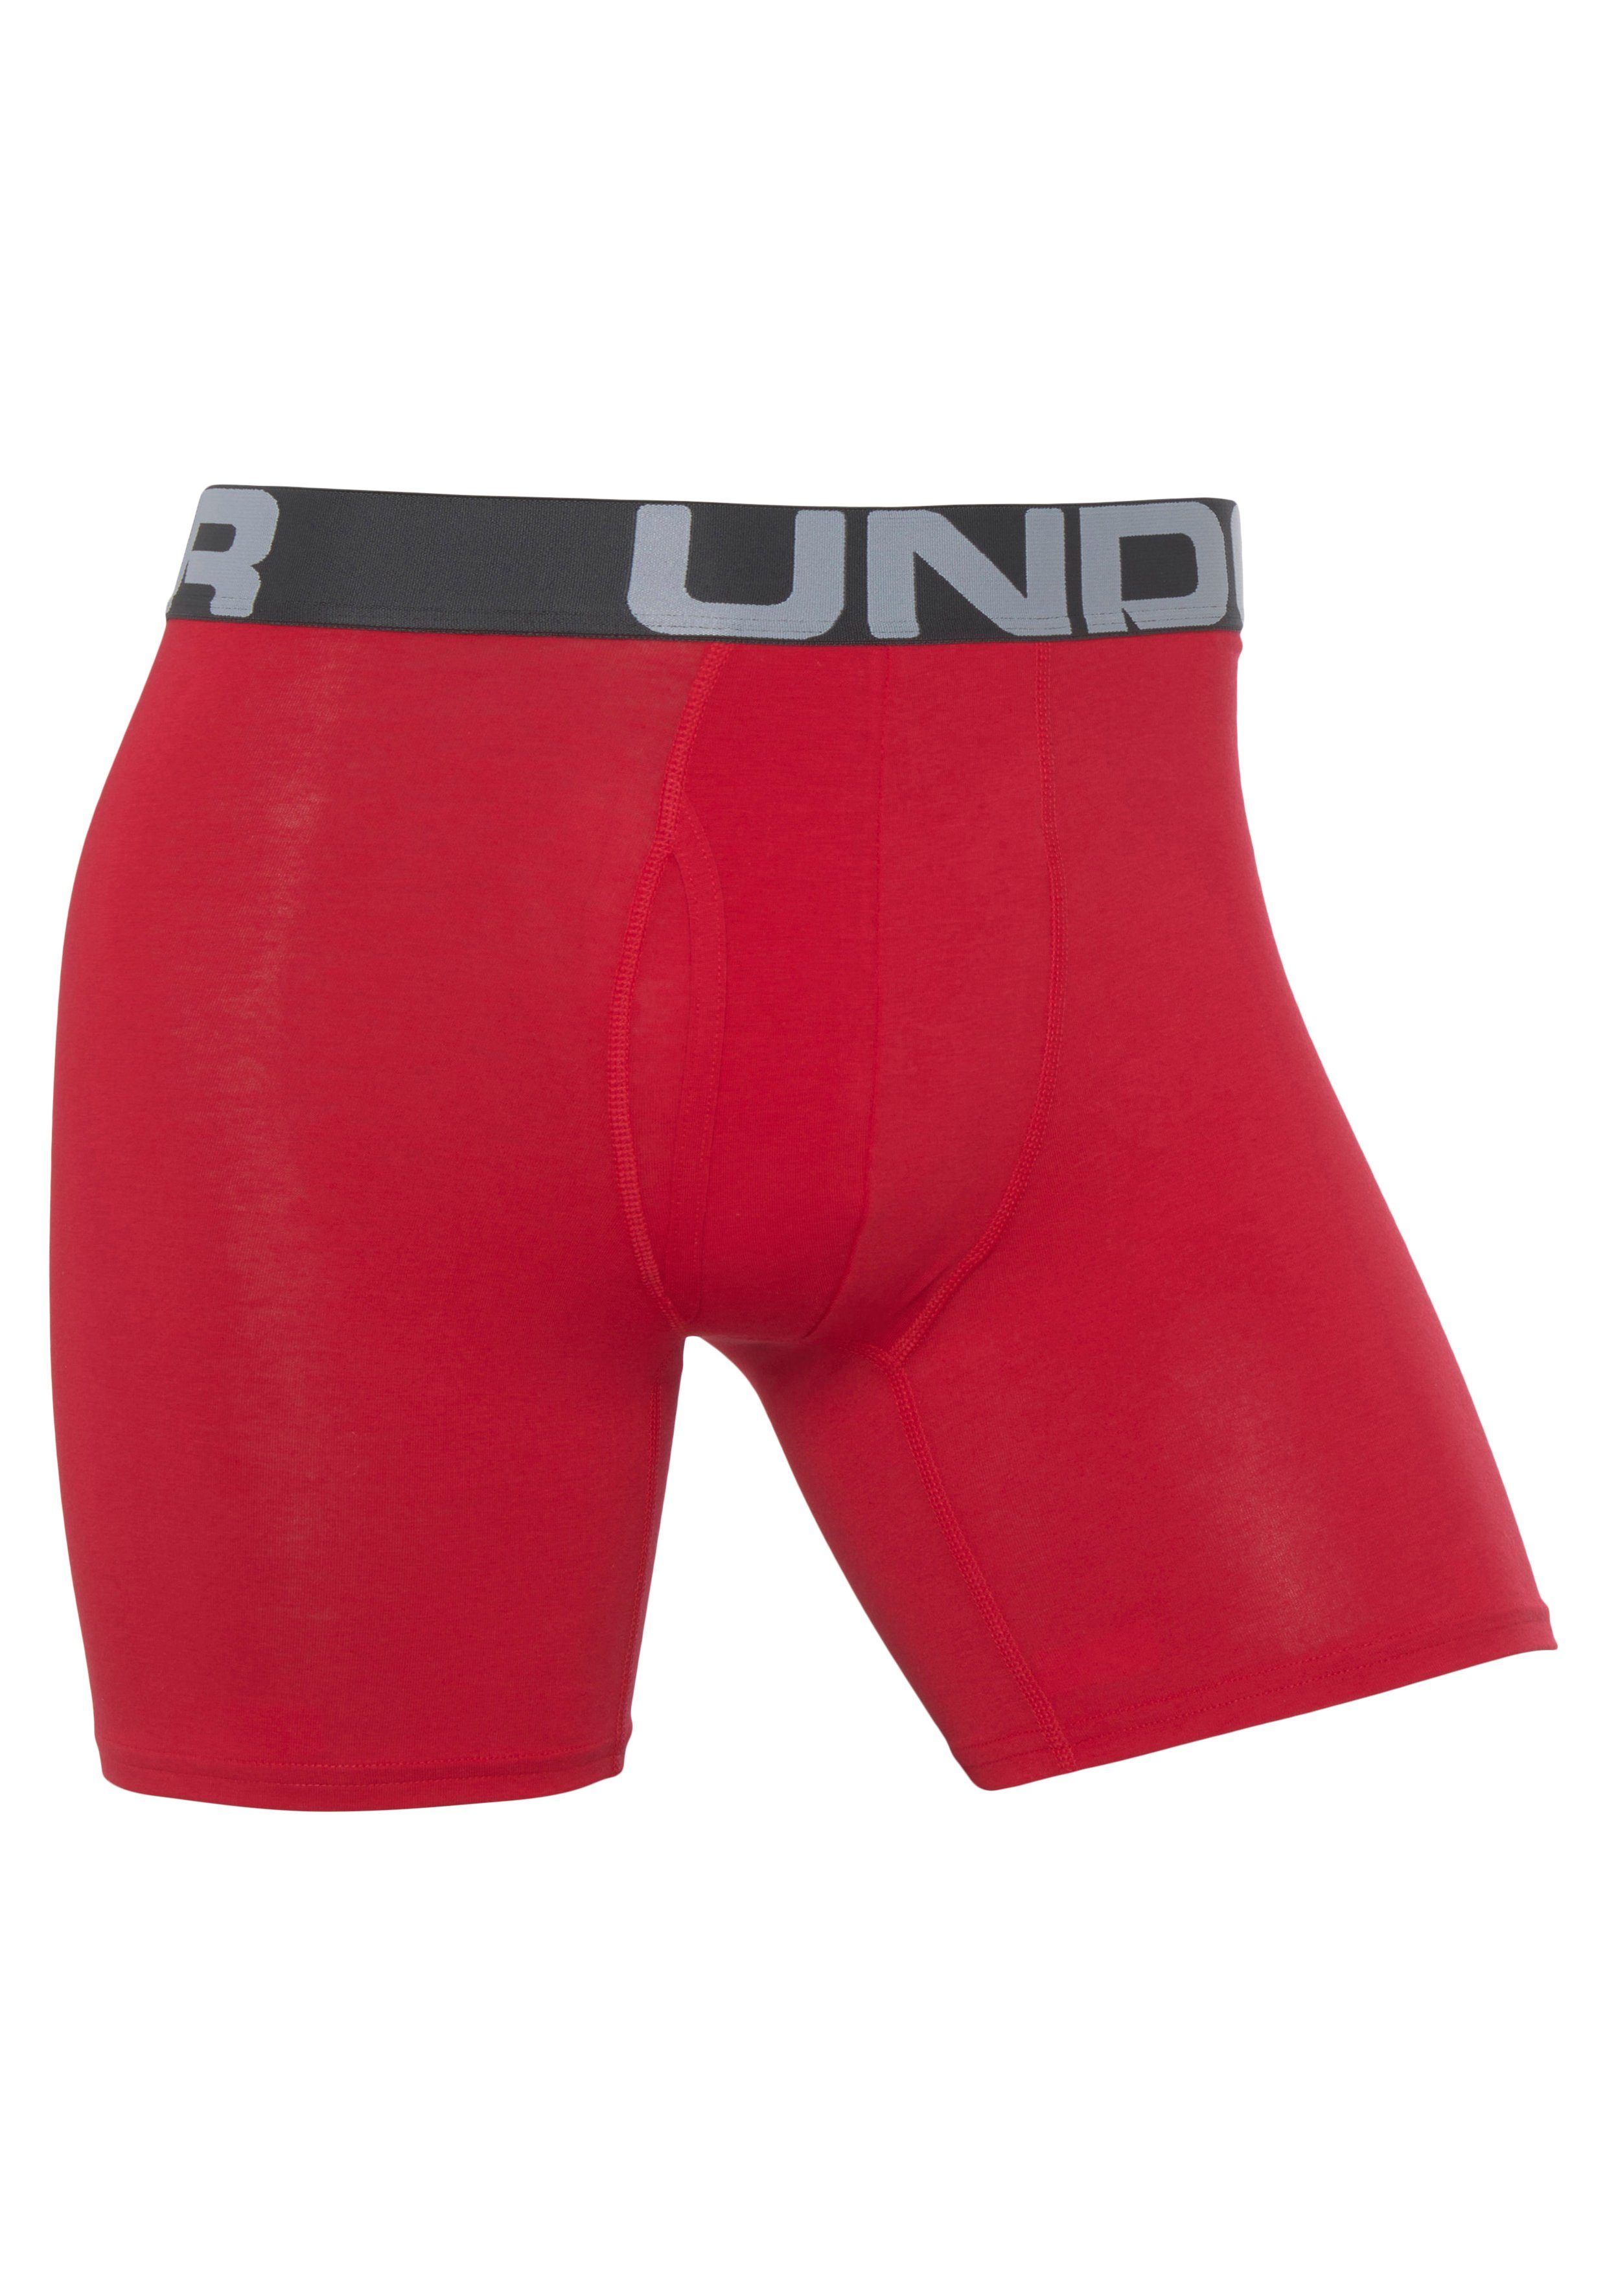 Under Armour® Boxershorts CHARGED 3er-Pack) 600 Red 6 1 (Packung, PACK in COTTON 3-St